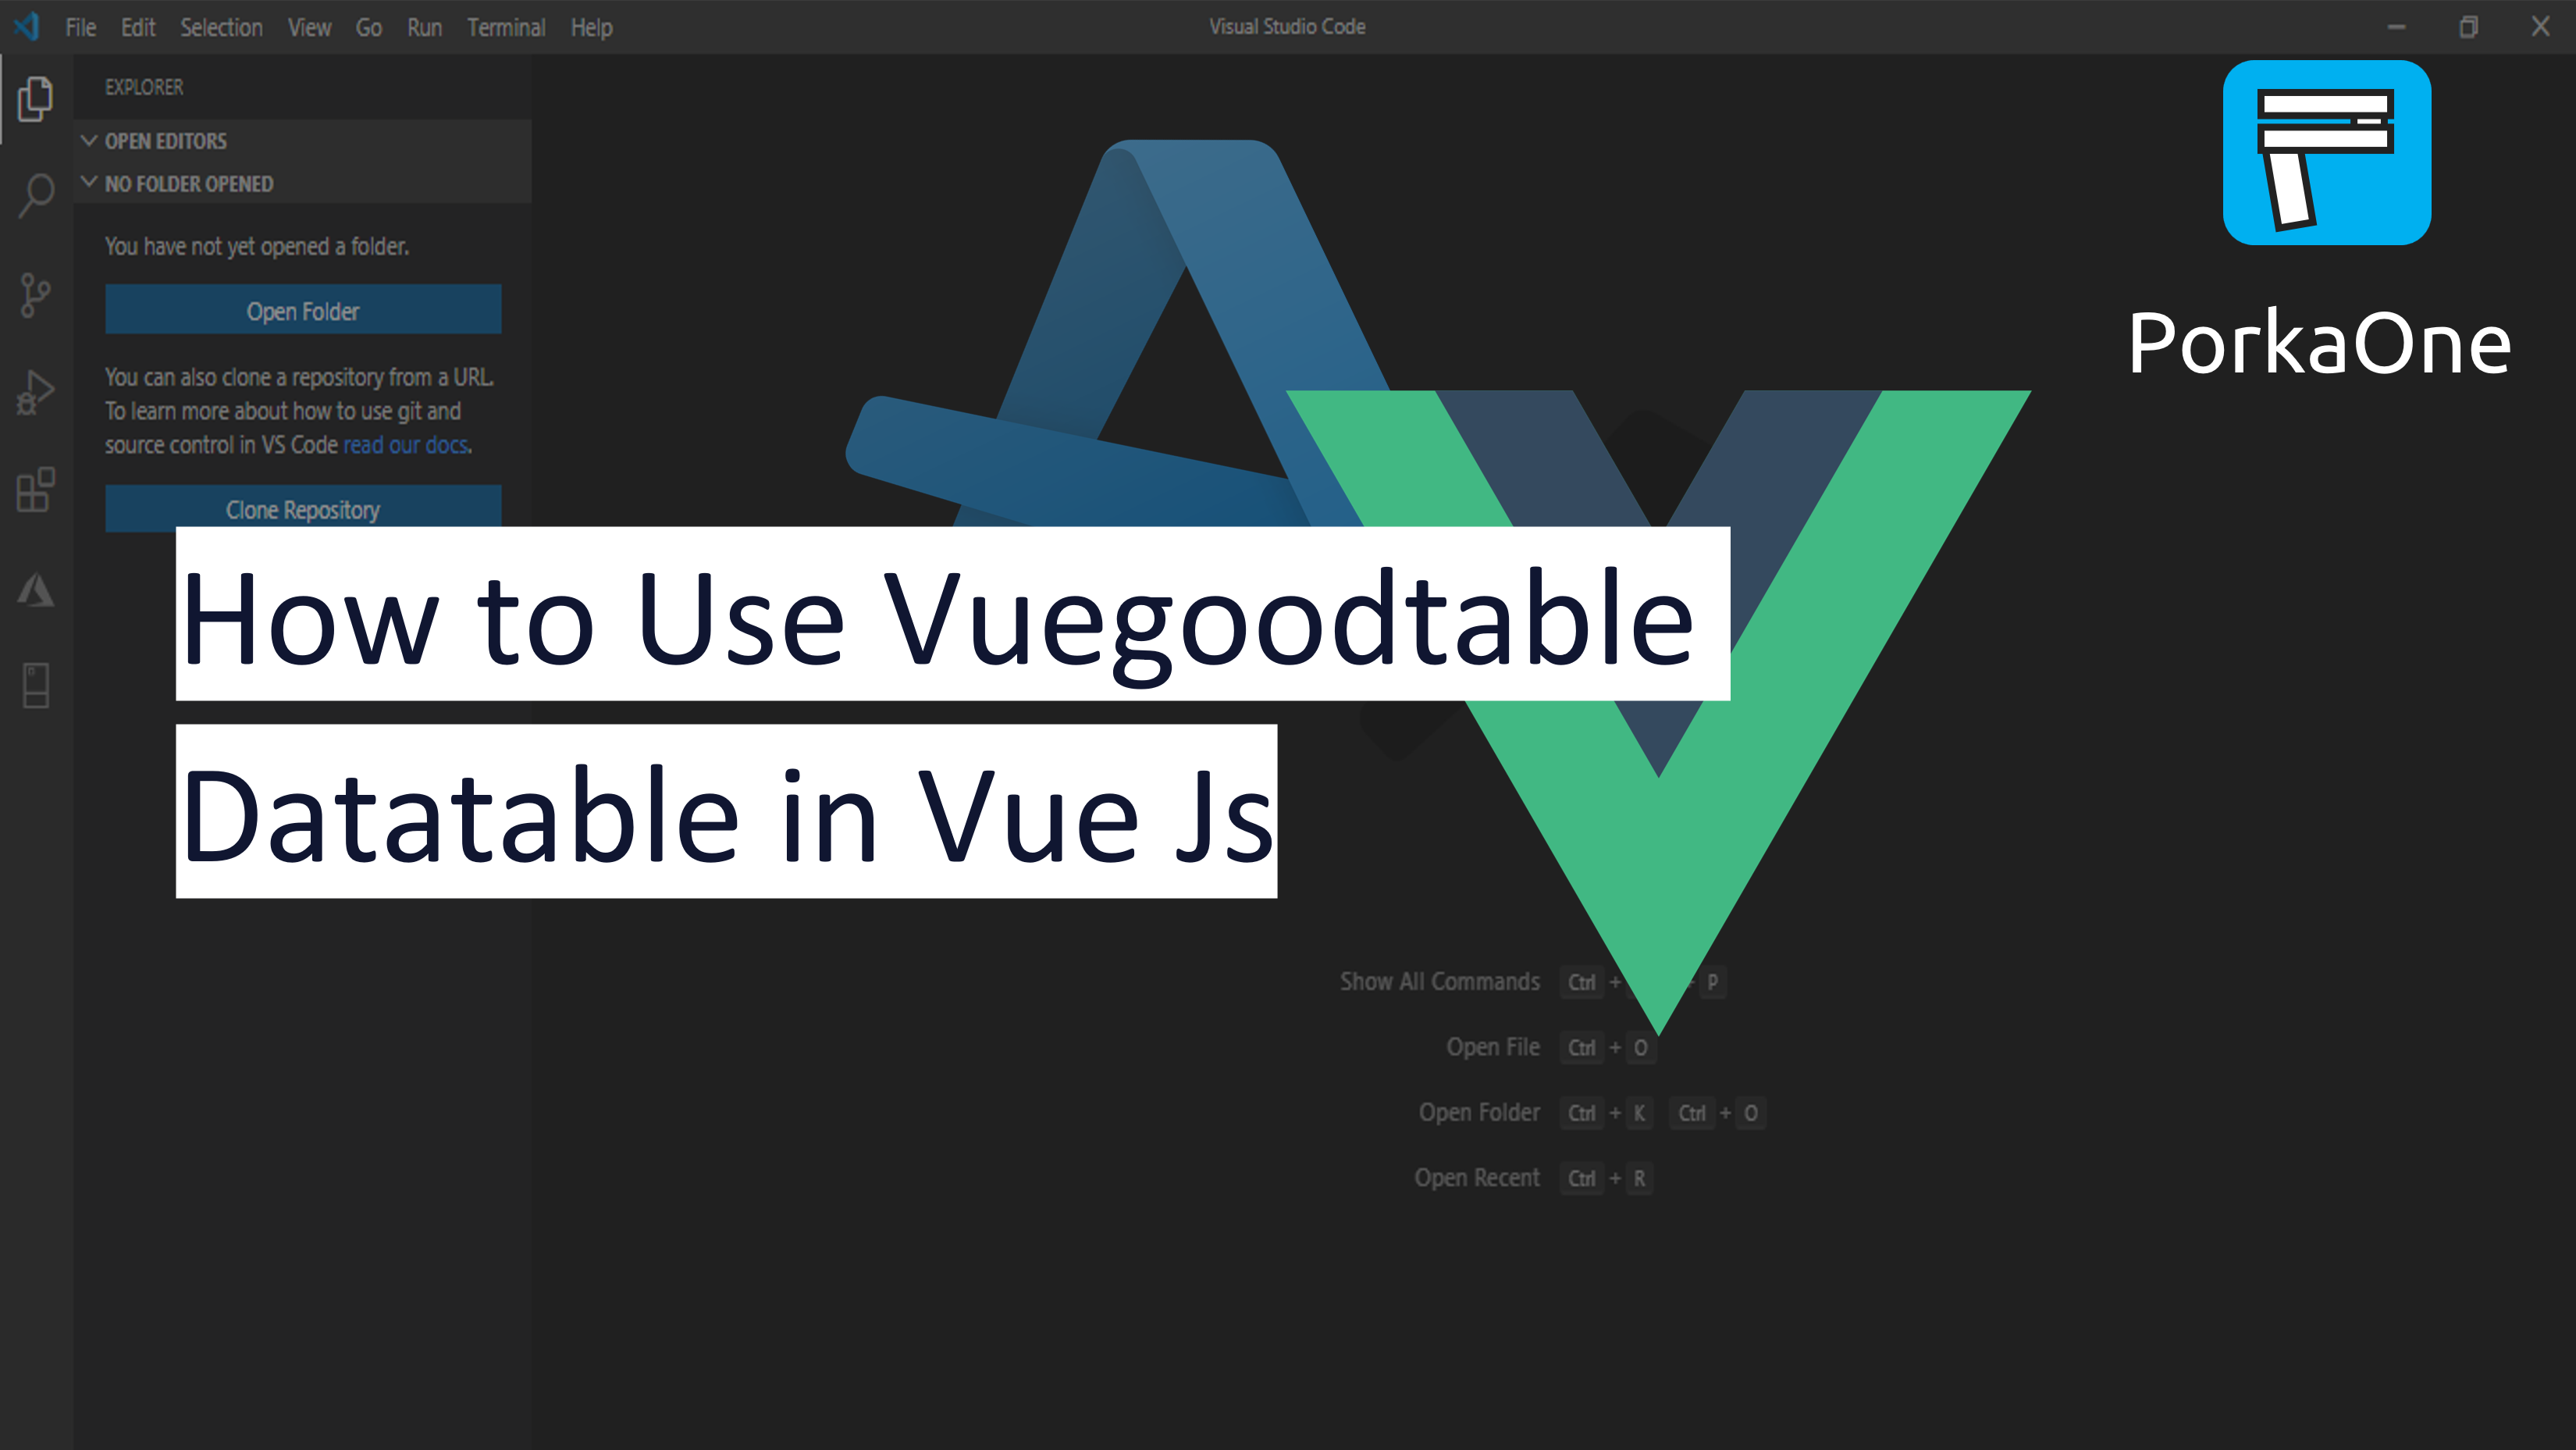 How to Use Vuegoodtable Datatable in Vue Js